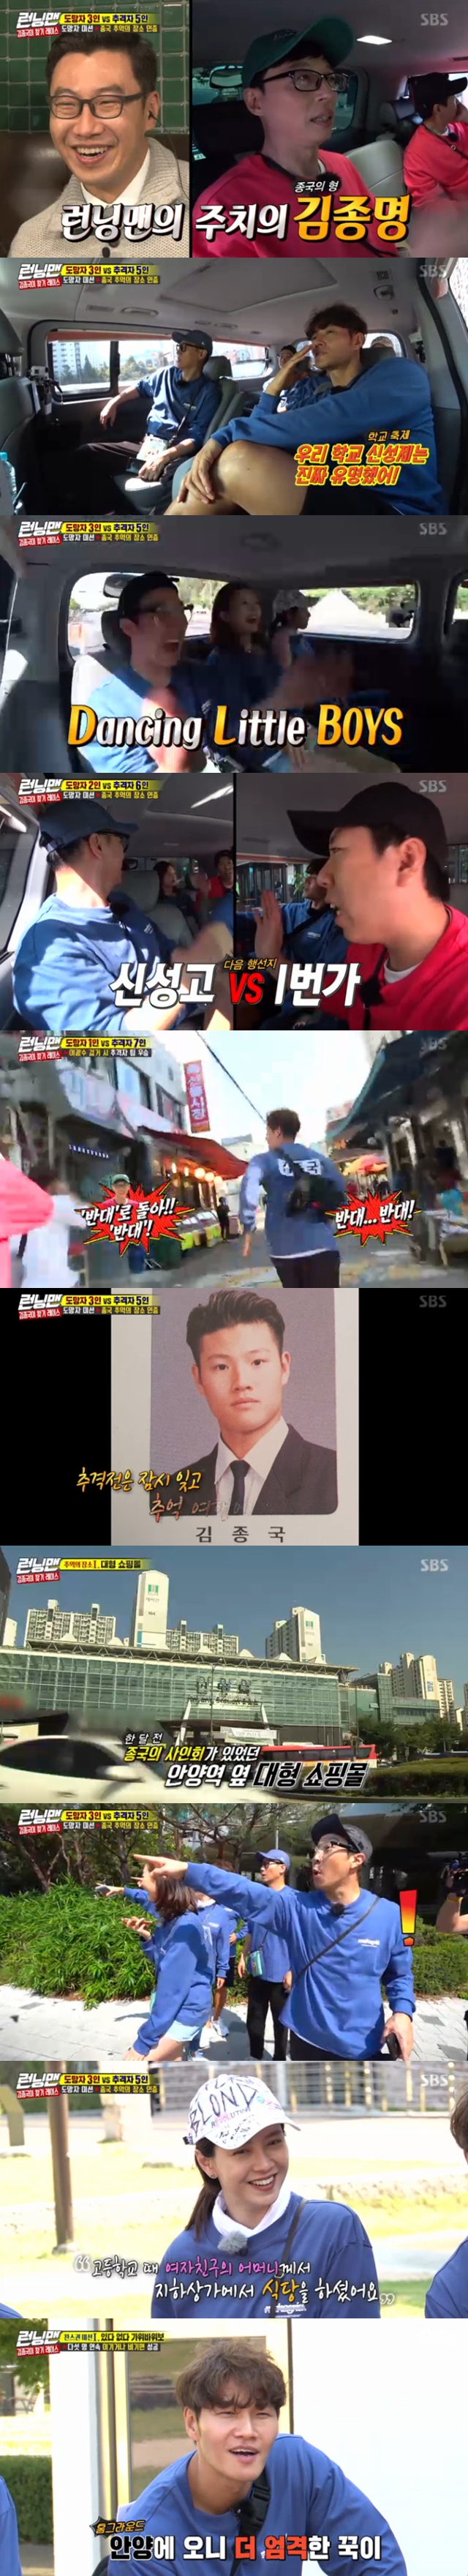 Anyangs son Kim Jong-kook summoned memories from Running ManOn SBS Running Man, which was broadcast on October 13, an exciting Anyang Oloke Kim Jong-kook Find Race was held.On this day, Race was uniquely Kim Jong-kook Finding The Chaser Race, which pretended to be an Anyang Hot Flace tour.Kim Jong-kook is an Anyang native so called Anyangs son.The prize money of 3 million won was divided into three fugitives and five of The Chaser.Kim Jong-kook came to Race without knowing this fact at all, and only the top three selected through a fake mission at the opening were able to eat at a restaurant recommended by Kim Jong-kook.The top three were fugitives, not meals, and the remaining five were on Kim Jong-kooks side.The first Fake Mission is a fly shopping cart that blows down a bowling pin with a large slingshot.Unlike Kim Jong-kook, who only knew the race of the day as an Anyang Hot Flace tour, the members made a reaction without knowing the Fake Mission.As a result of the game, Yoo Jae-Suk Lee Kwang-soo Yang Se-chan started to escape as a fugitive, and the remaining members became The Chaser with Kim Jong-kook.The fugitives stepped out to certify the Kim Jong-kook memory site.The fugitives headed to the Anyang large shopping mall, one of the first Kim Jong-kook memories.But I was frustrated by the fact that I had to perform the 110-sign mission after opening an instant fan signing like Kim Jong-kook, and they eventually lost their sweat to open an instant fan signing.The second and third memories were Kim Jong-kooks regular Seolleungtang and Dongas, and the fugitives challenged Seolleungtang and Dongas Eating Mission.Race results showed that the fugitives Yang Se-chan and Yoo Jae-Suk were arrested in turn, and only the last fugitive Lee Kwang-soo remained.Kim Jong-kook The last place of memories was certified, and seven Running Man and Lee Kwang-soos sparkling chase took place in the city of Anyang in the daytime.As a result, Lee Kwang-soos name tag was finally torn apart, and The Chaser team won the final.Throughout the race, Kim Jong-kook was in memories, recalling the Anyang Hot Flace of memories.First, Kim Jong-kook introduced a happy alley alley alley that was able to enjoy the happiness of 5,000 won and the young mans city where many friends gathered and fought.Kim Jong-kook recalled memories of Anyang underground shopping mall.Kim Jong-kook said, My girlfriends mother at high school had a restaurant in the underground shopping mall and ate kimchi fried rice when she went to the market.Kim Jong-kook also recalled memories such as referring to the cherry blossom road, saying, Cherry blossoms are amazing in the running car.In addition, Kim Jong-kook, a former Shinsung High School student, said, I did a lot of school events. Shinseongje was really famous.My school was heaven, I liked school and I was proud of school. Kim Jong-kooks brother-in-law Kim Jong-myeong also appeared in a telephone voice for a long time and told him that Kim Jong-kook often went to Anyang 1st Street.Kim Jong-kook manager also informed members of Kim Jong-kooks regular house.bak-beauty